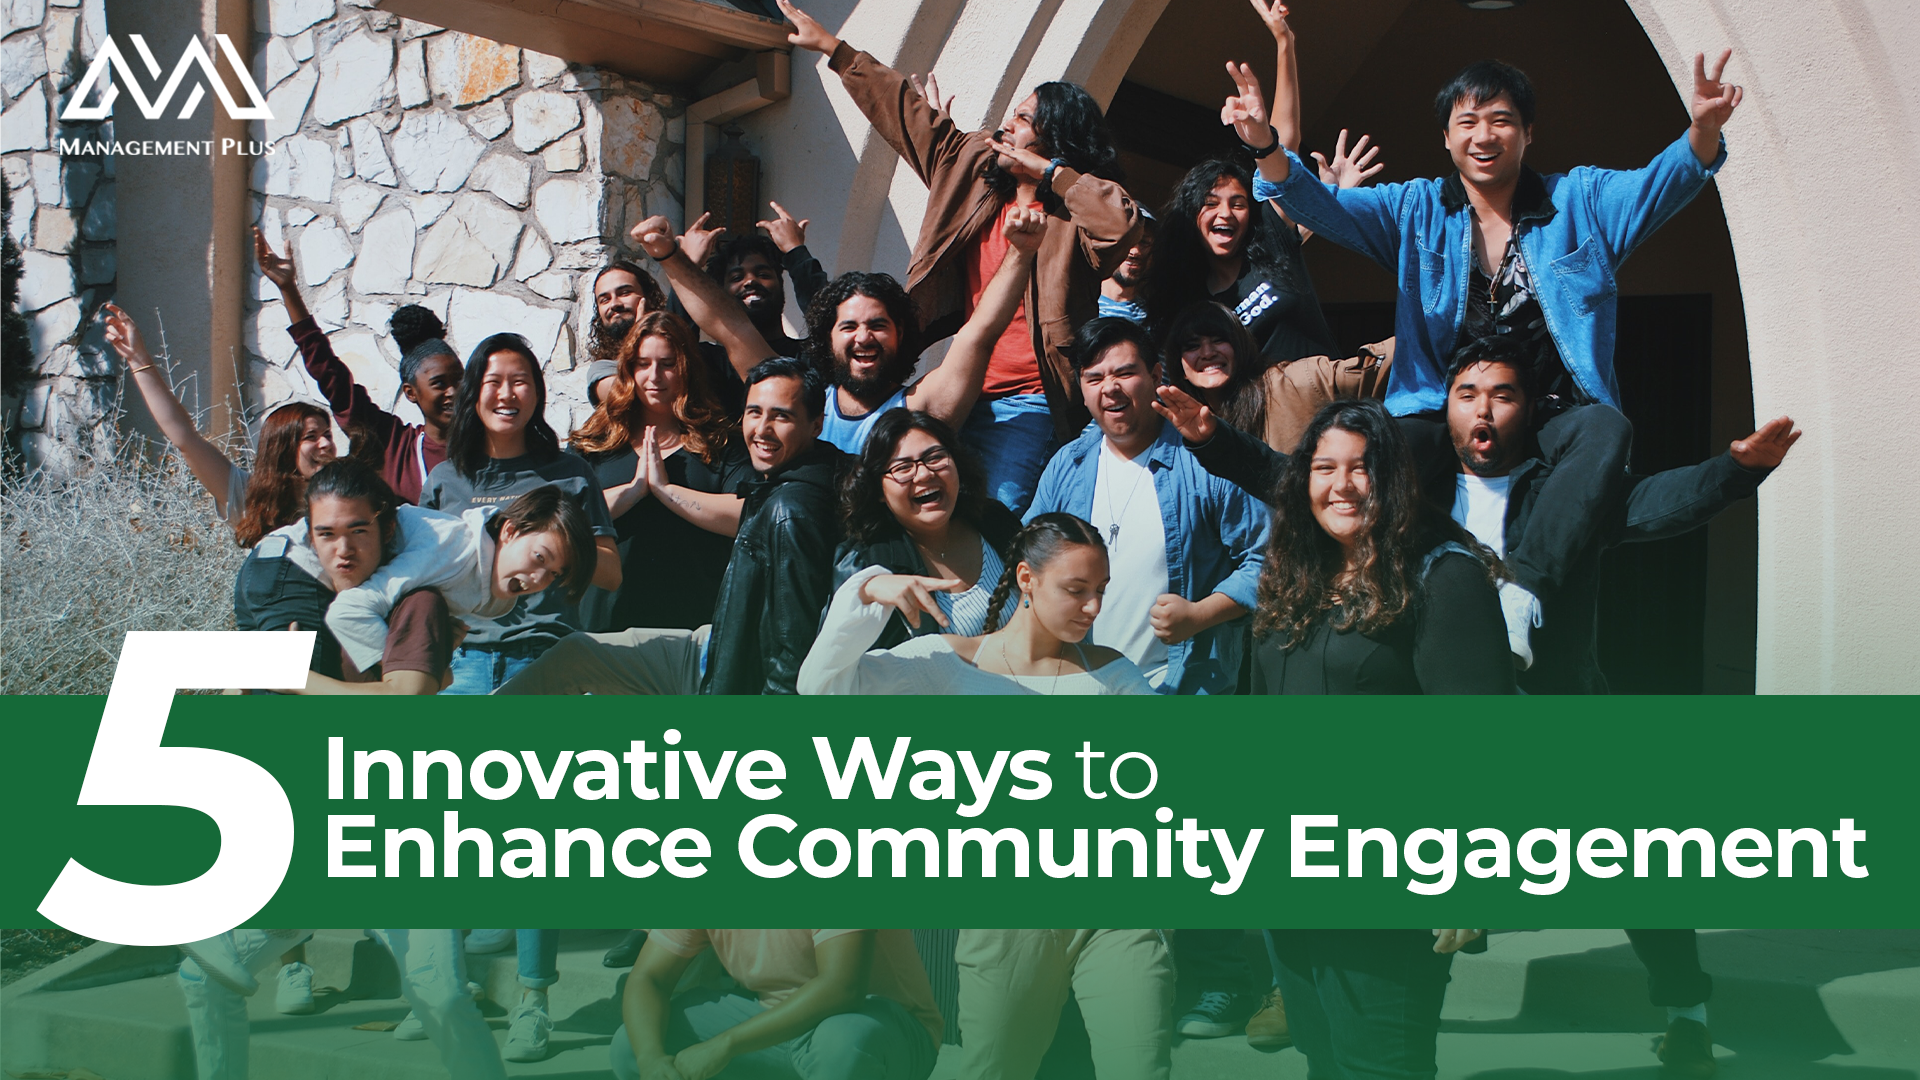 A group of people posing happily for a photo. The text reads, "5 Innovative Ways to Enhance Community Engagement" 